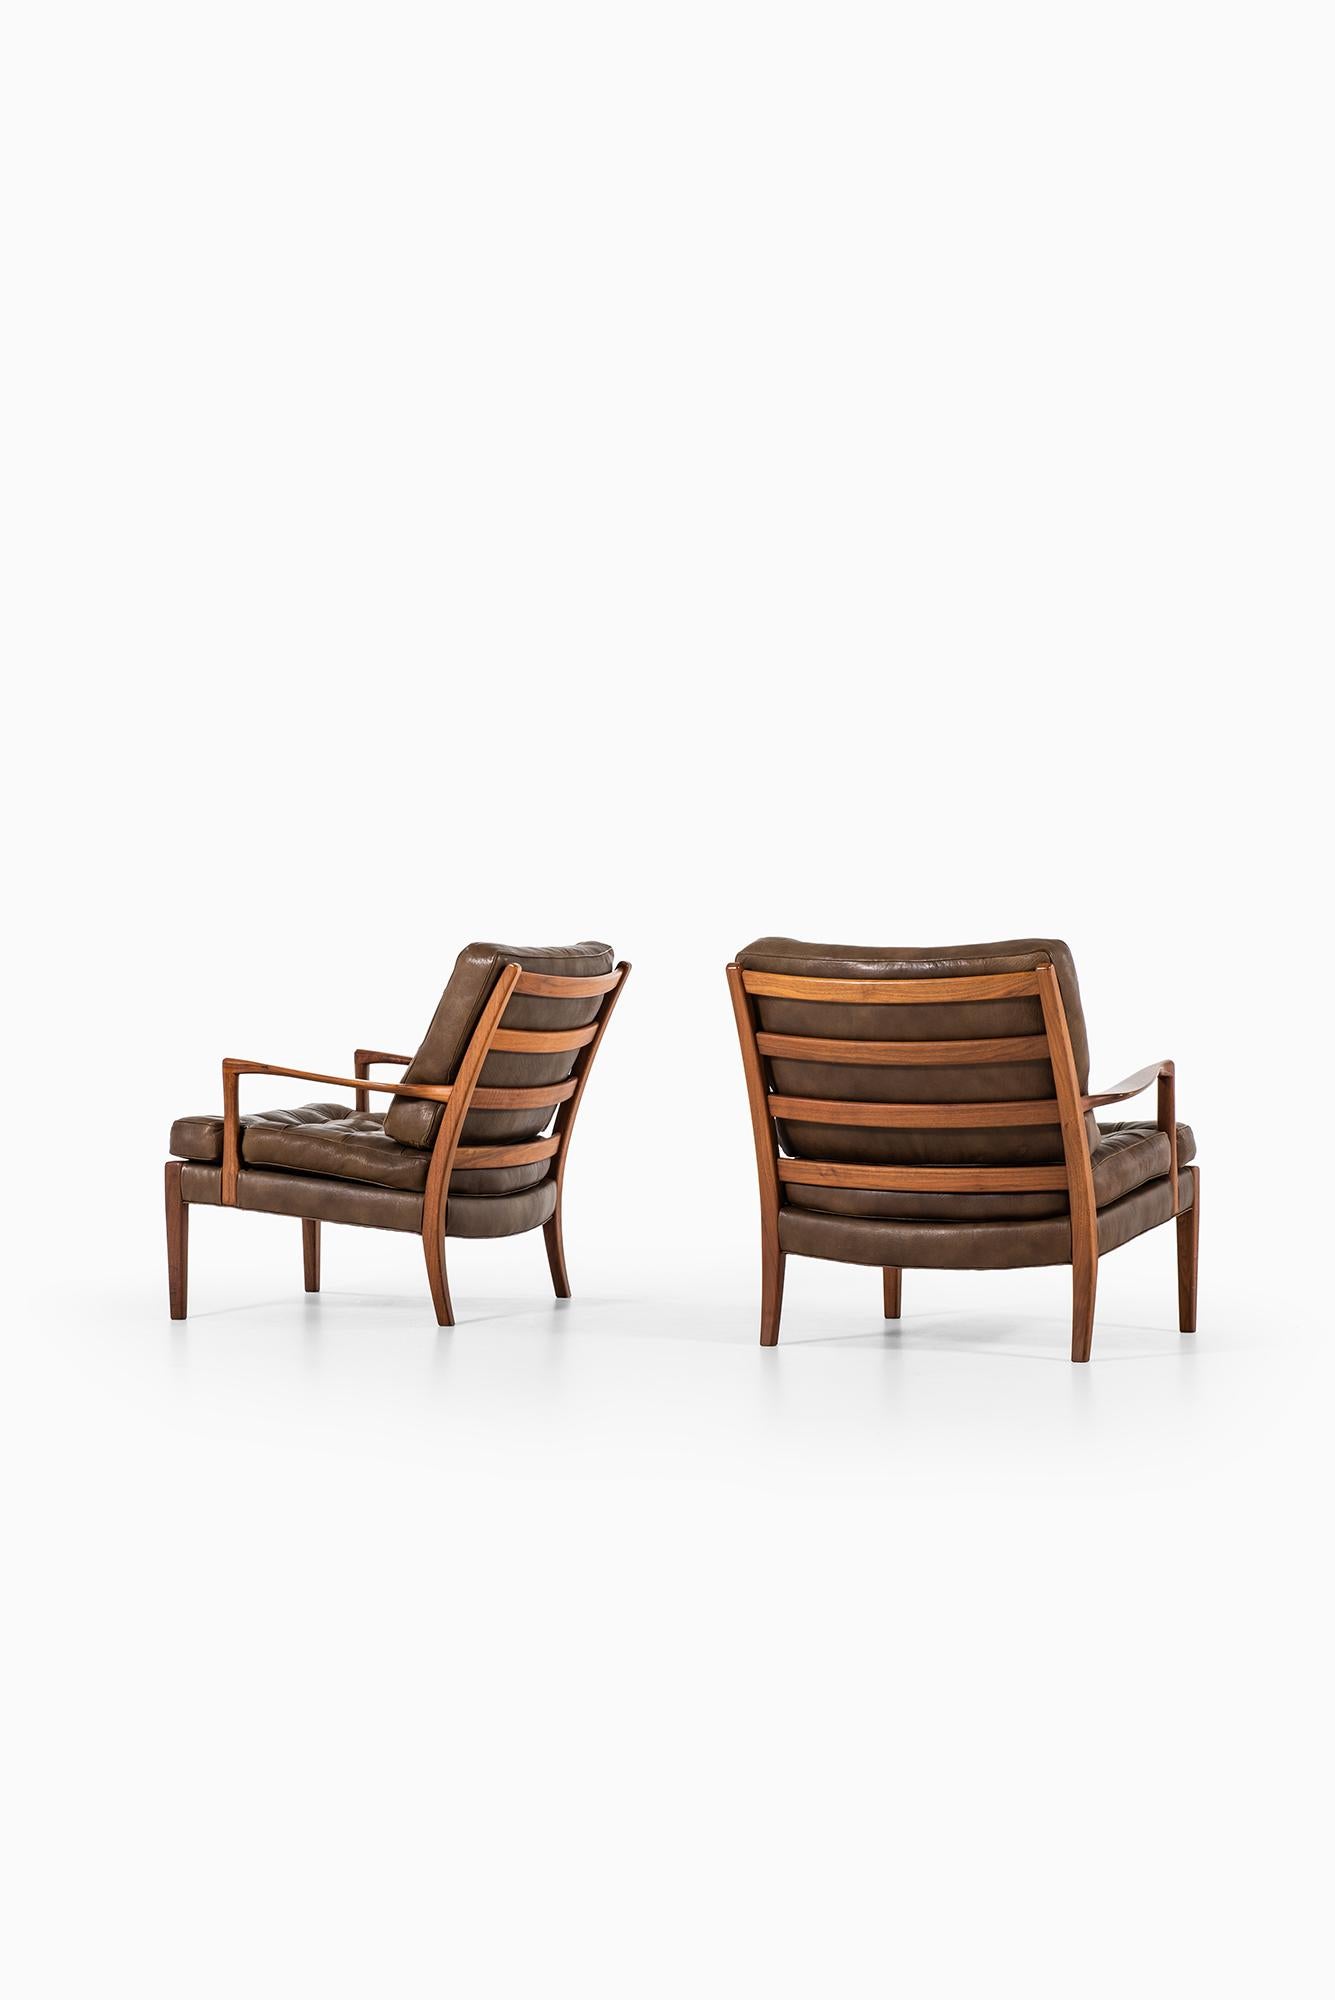 Mid-20th Century Arne Norell Easy Chairs Model Löven by Arne Norell AB in Sweden